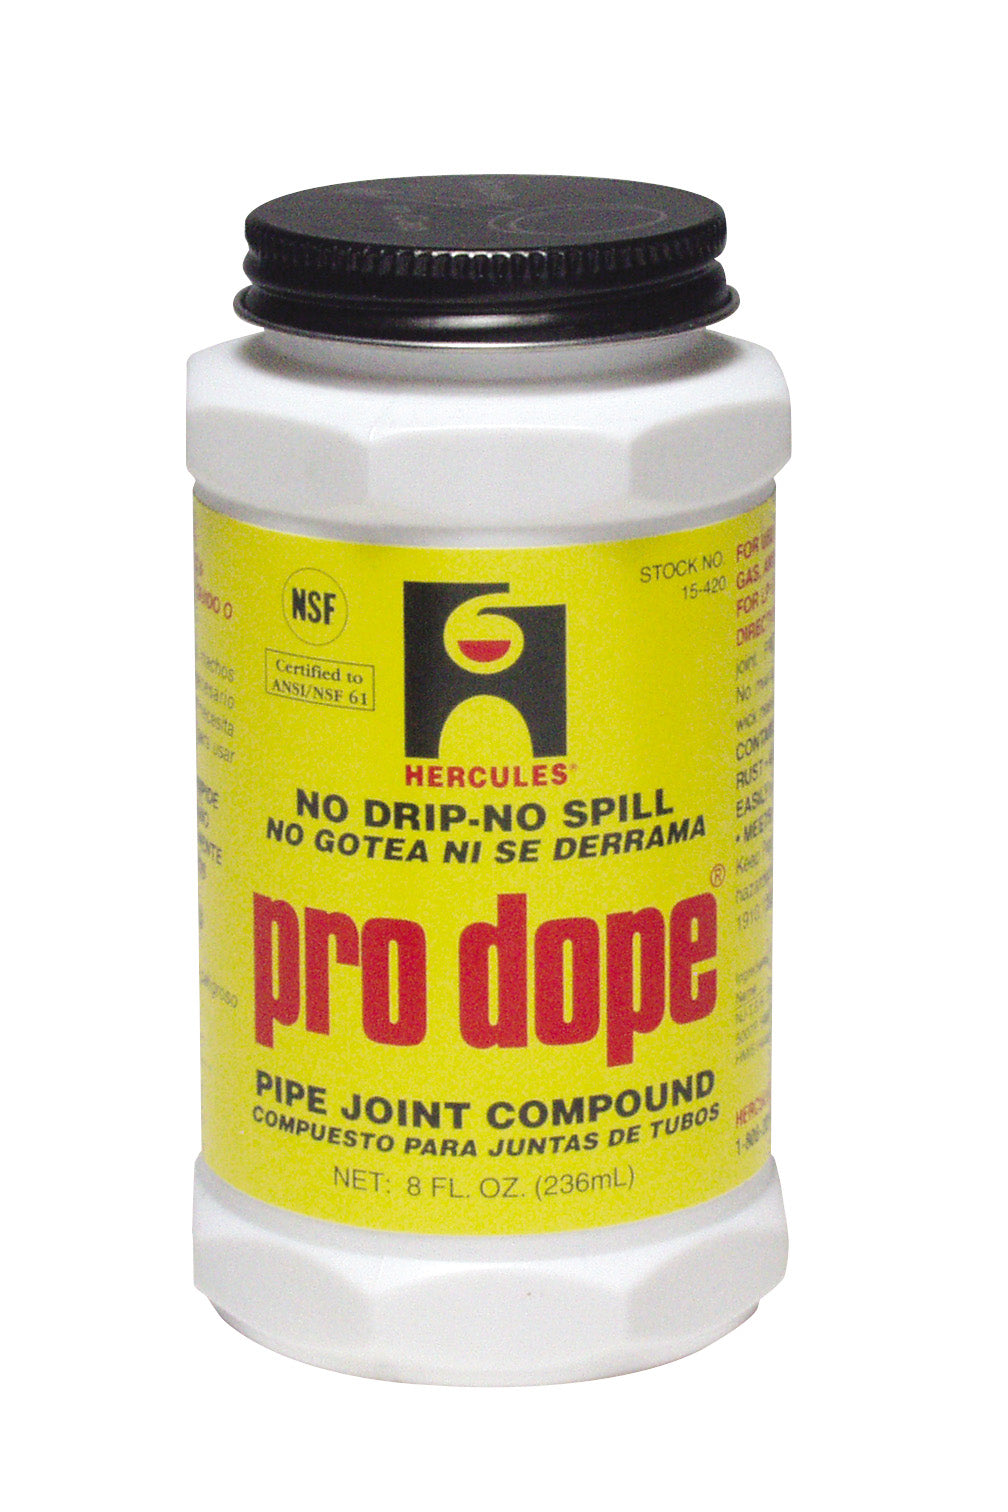 Buy hercules pro dope - Online store for solvents & sealers, compounds in USA, on sale, low price, discount deals, coupon code